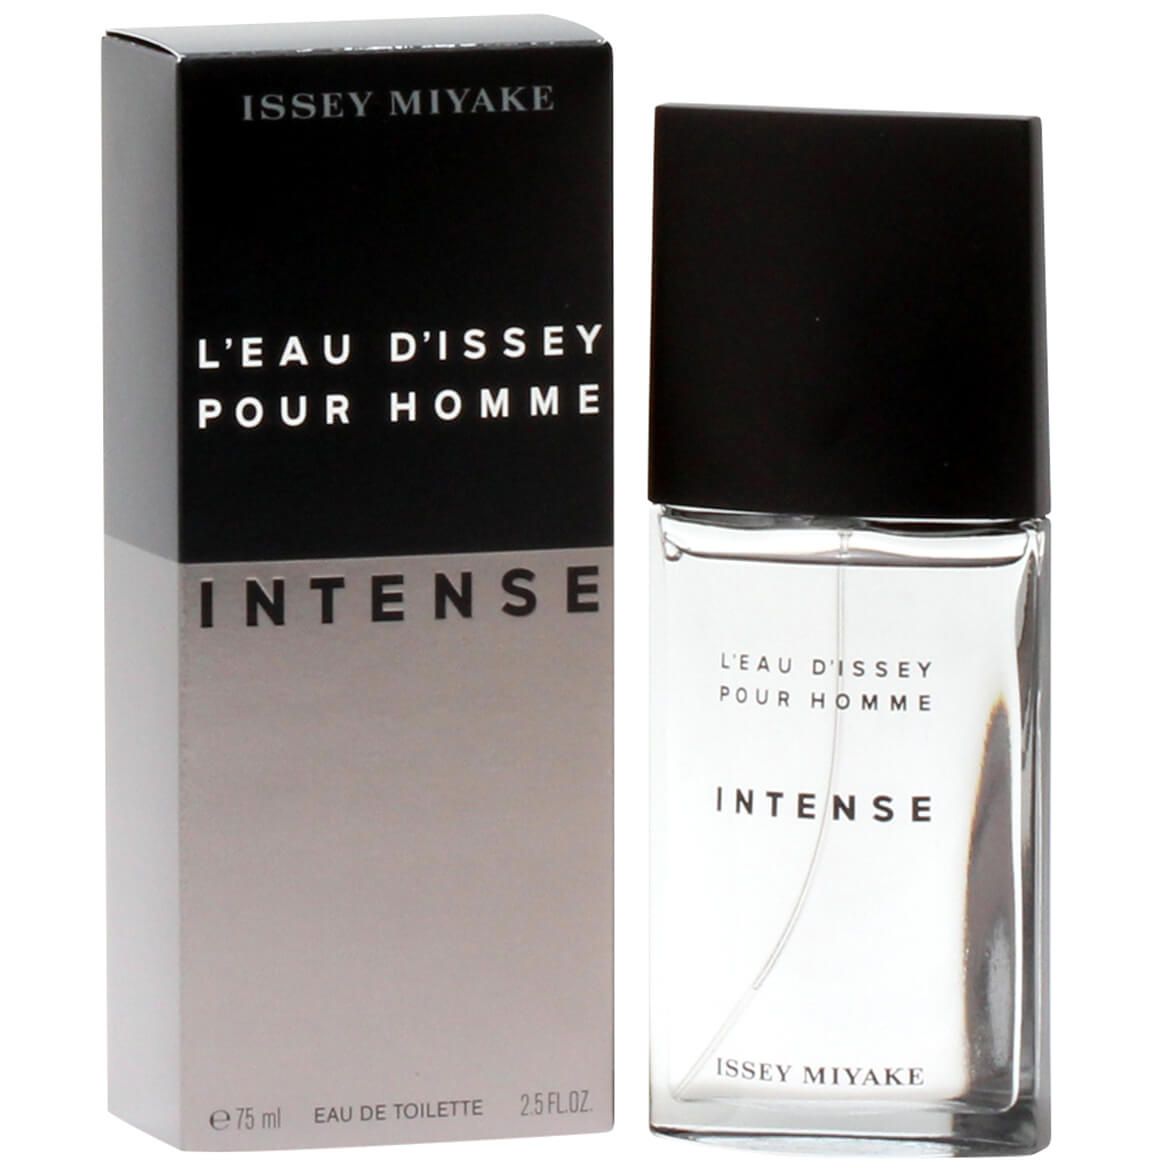 Issey Miyake L'Eau D'Issey Intense for Men EDT, 2.5 oz. + '-' + 366849